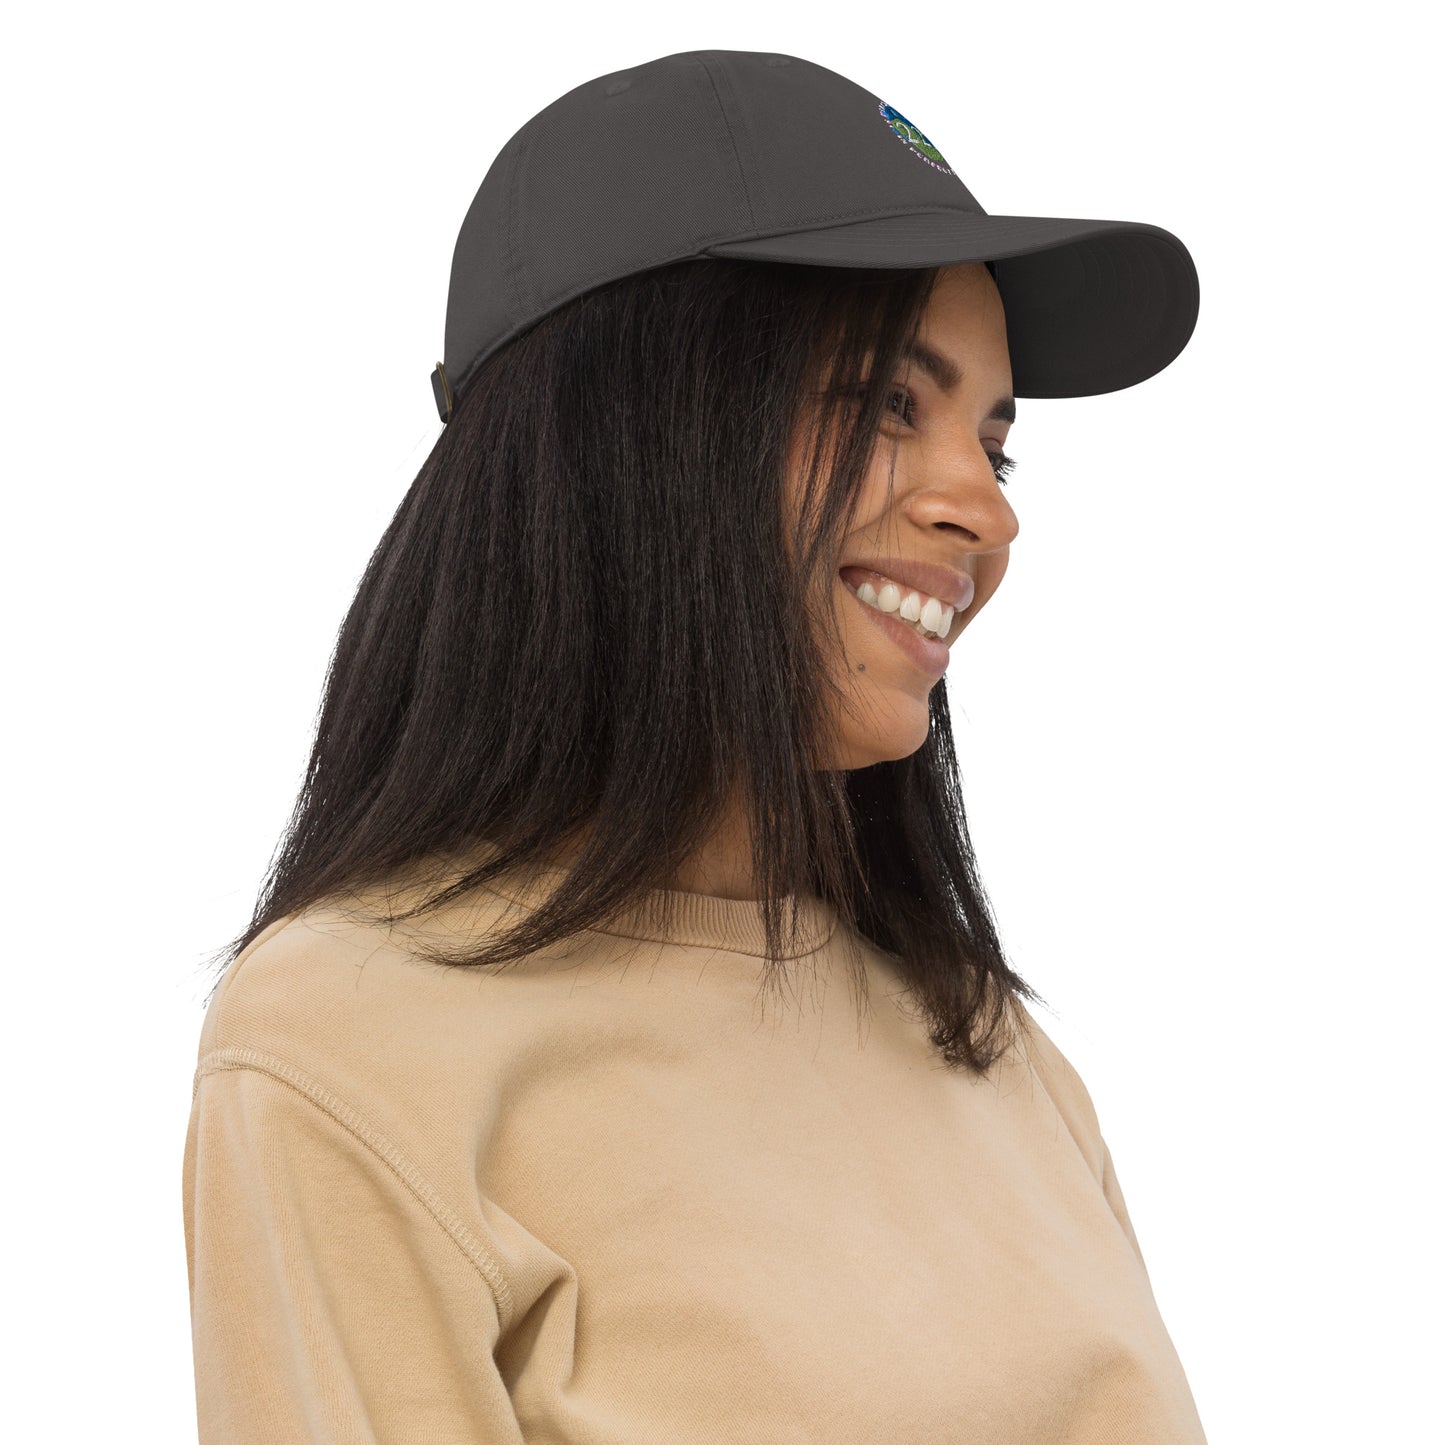 In Perfect Balance 222 Angel Number Organic Cotton dad hat